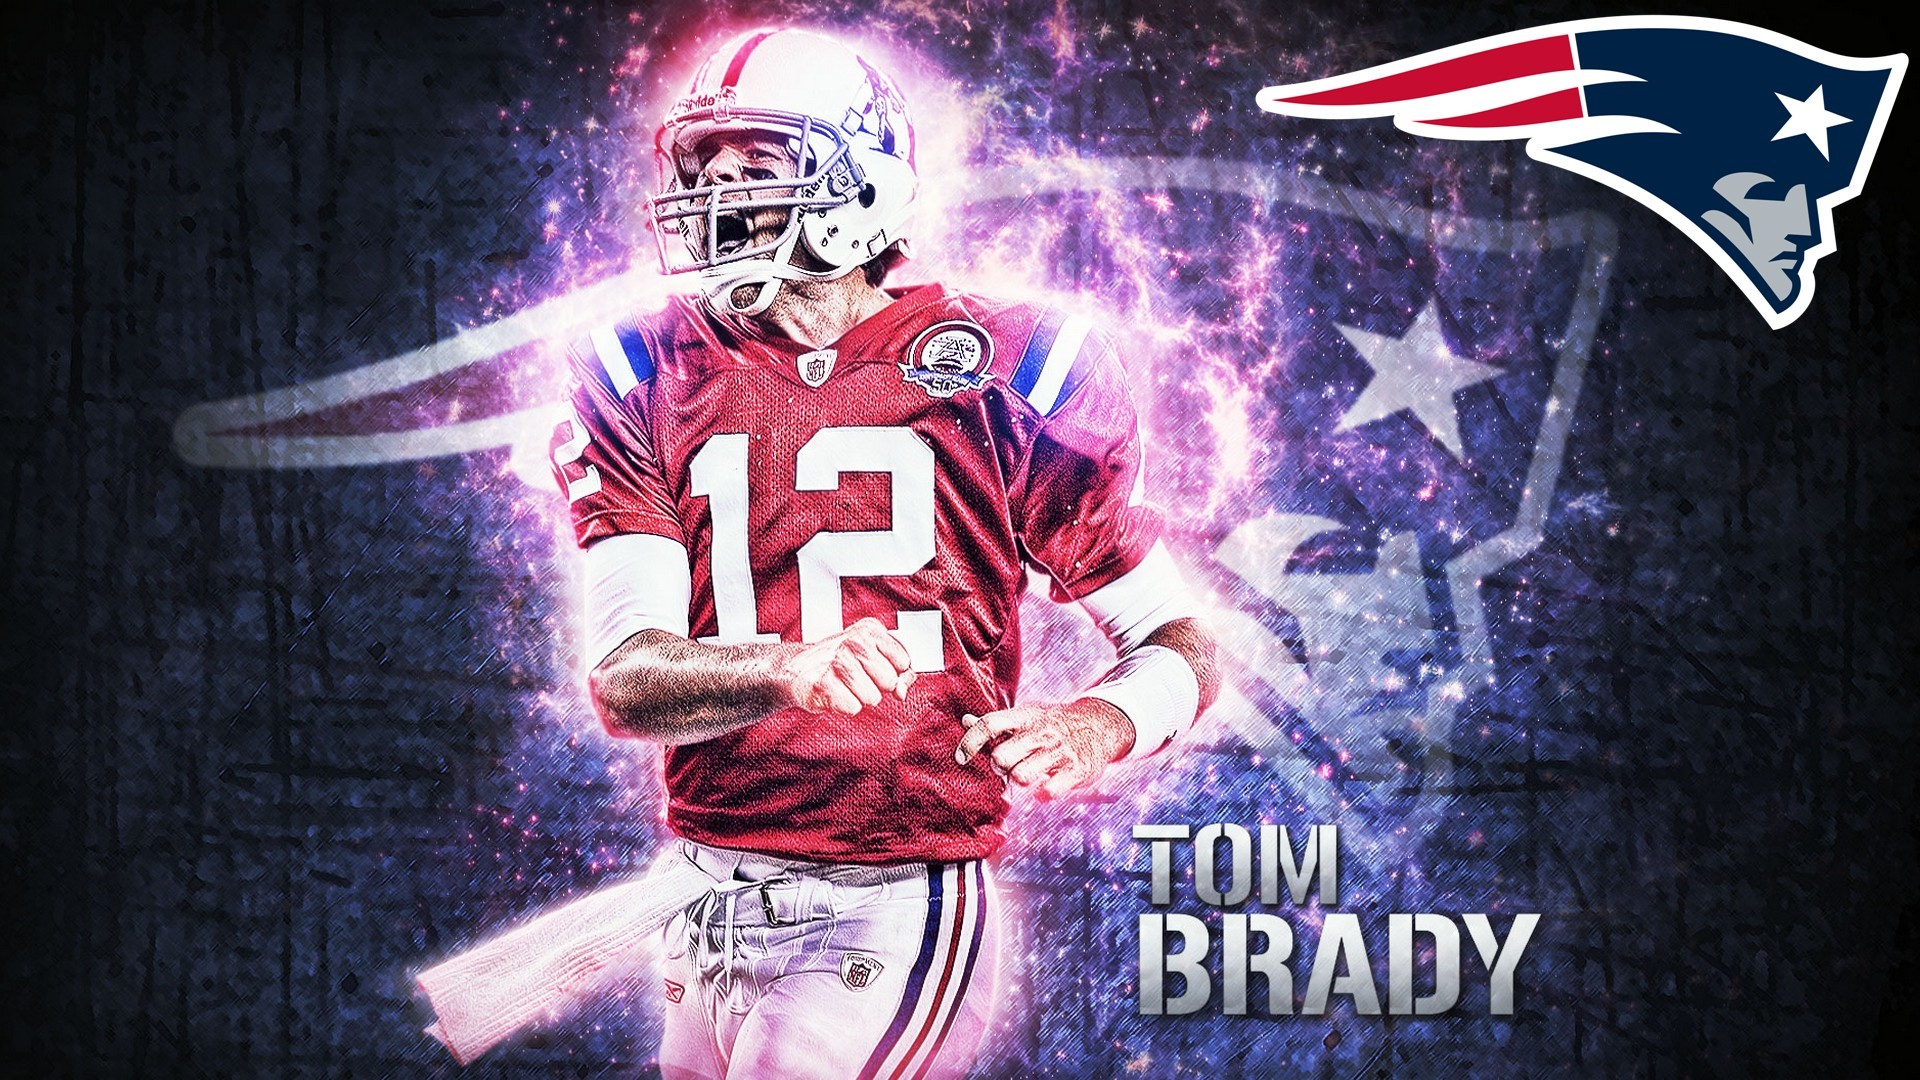 1920x1080 Tom Brady Patriots Mac Backgrounds with resolution  pixel. You can  make this wallpaper for